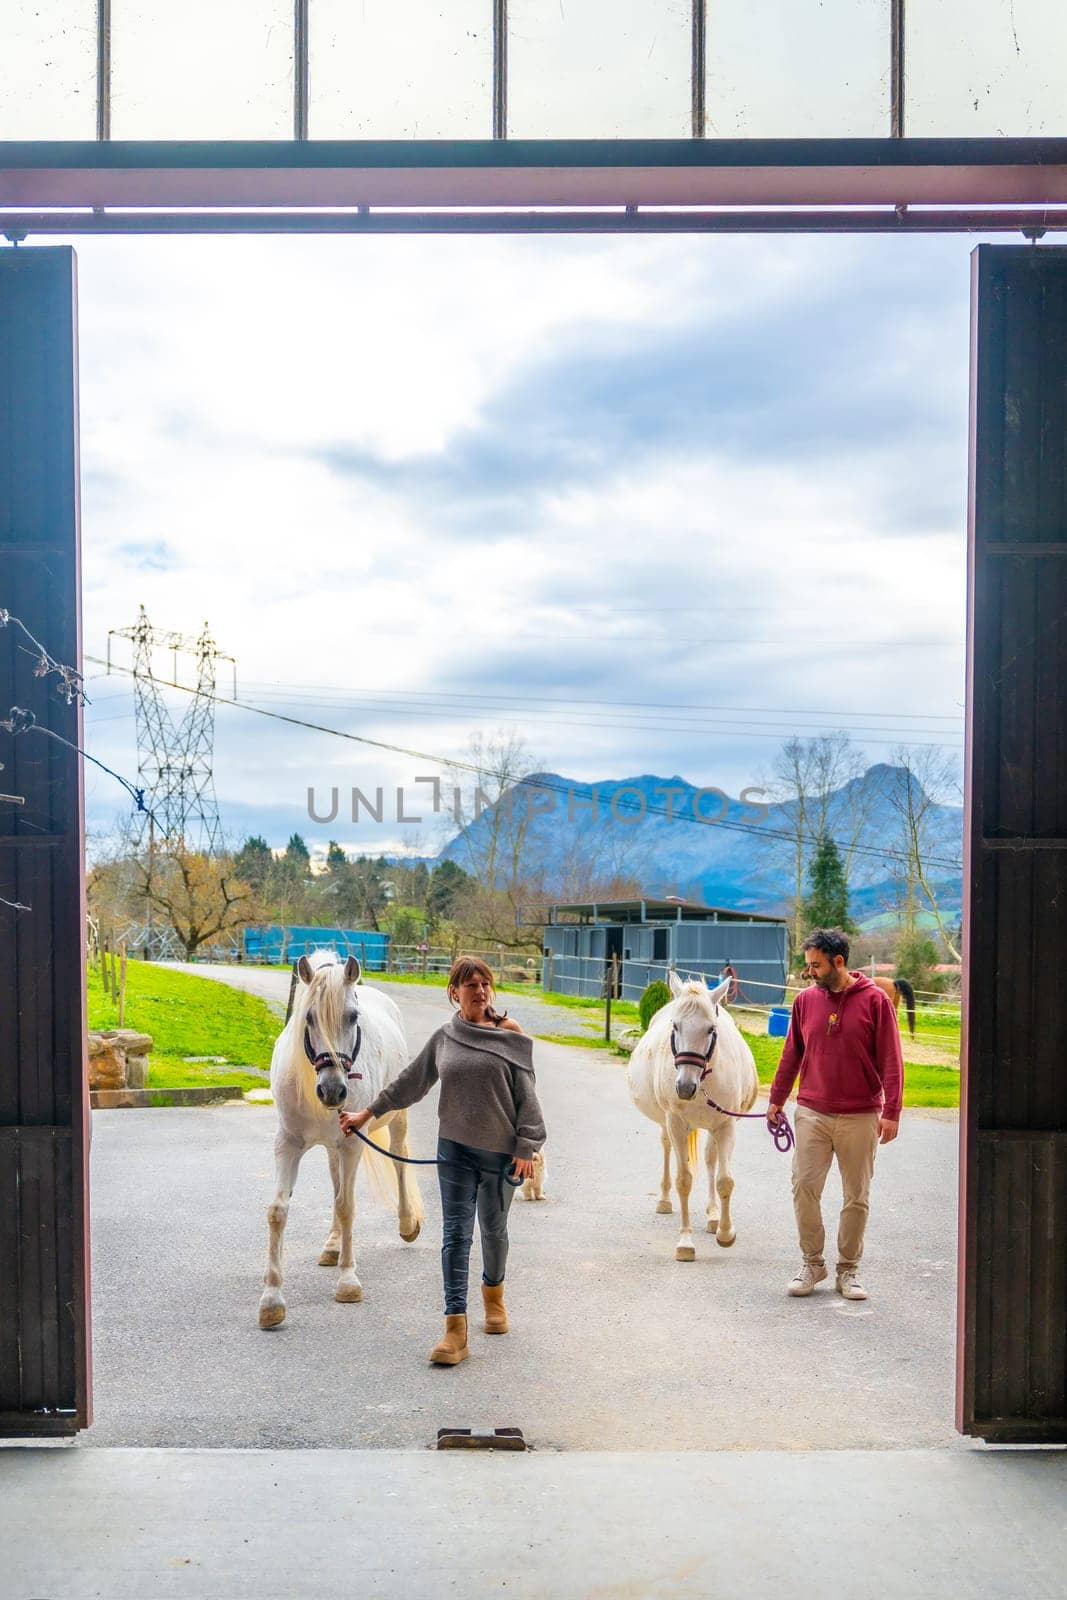 Vertical photo through a door of a stable of people walking carrying horses on a equestrian center